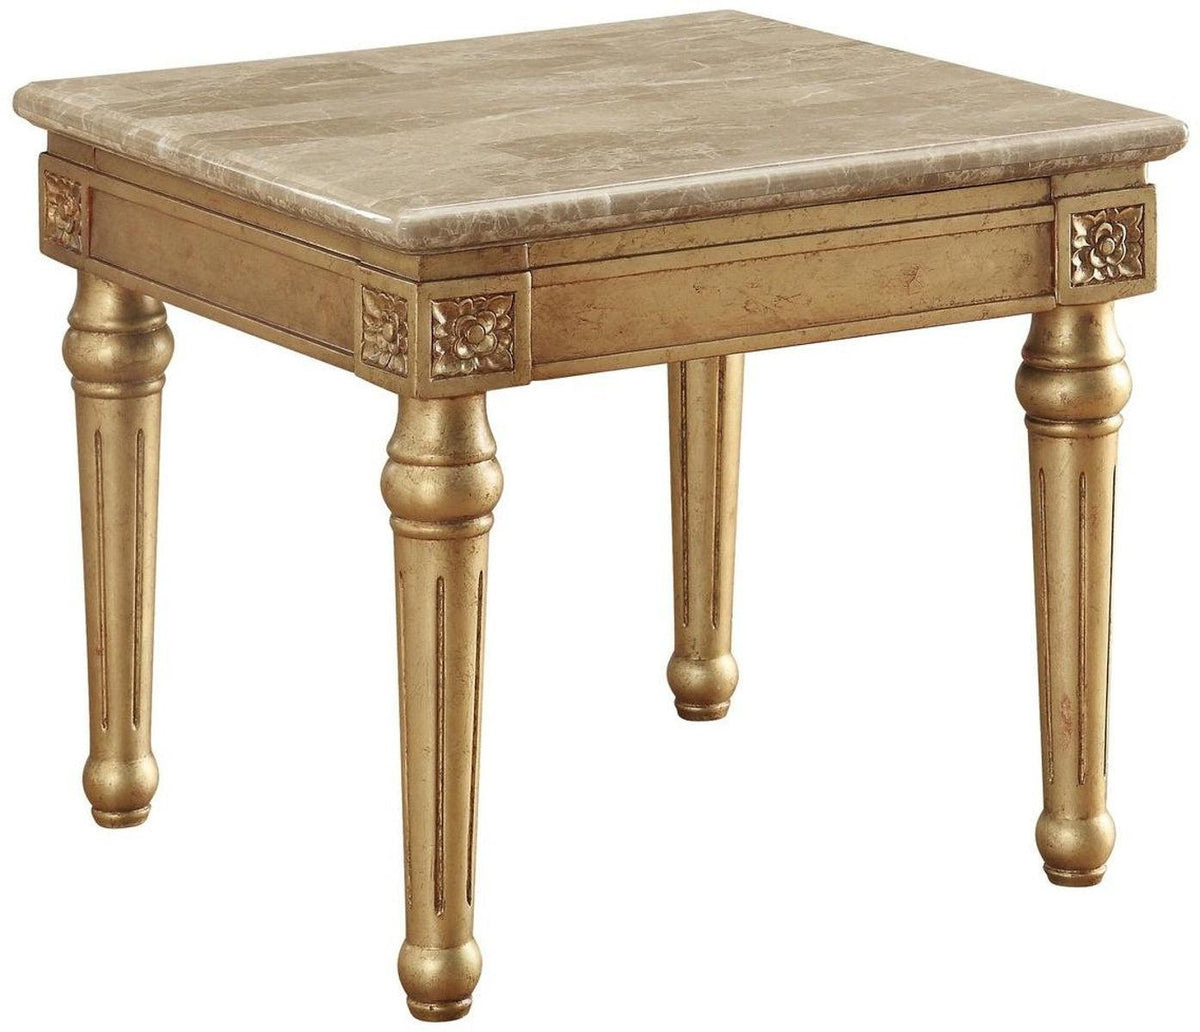 Acme Furniture Daesha End Table in Marble/Antique Gold 81717  Las Vegas Furniture Stores